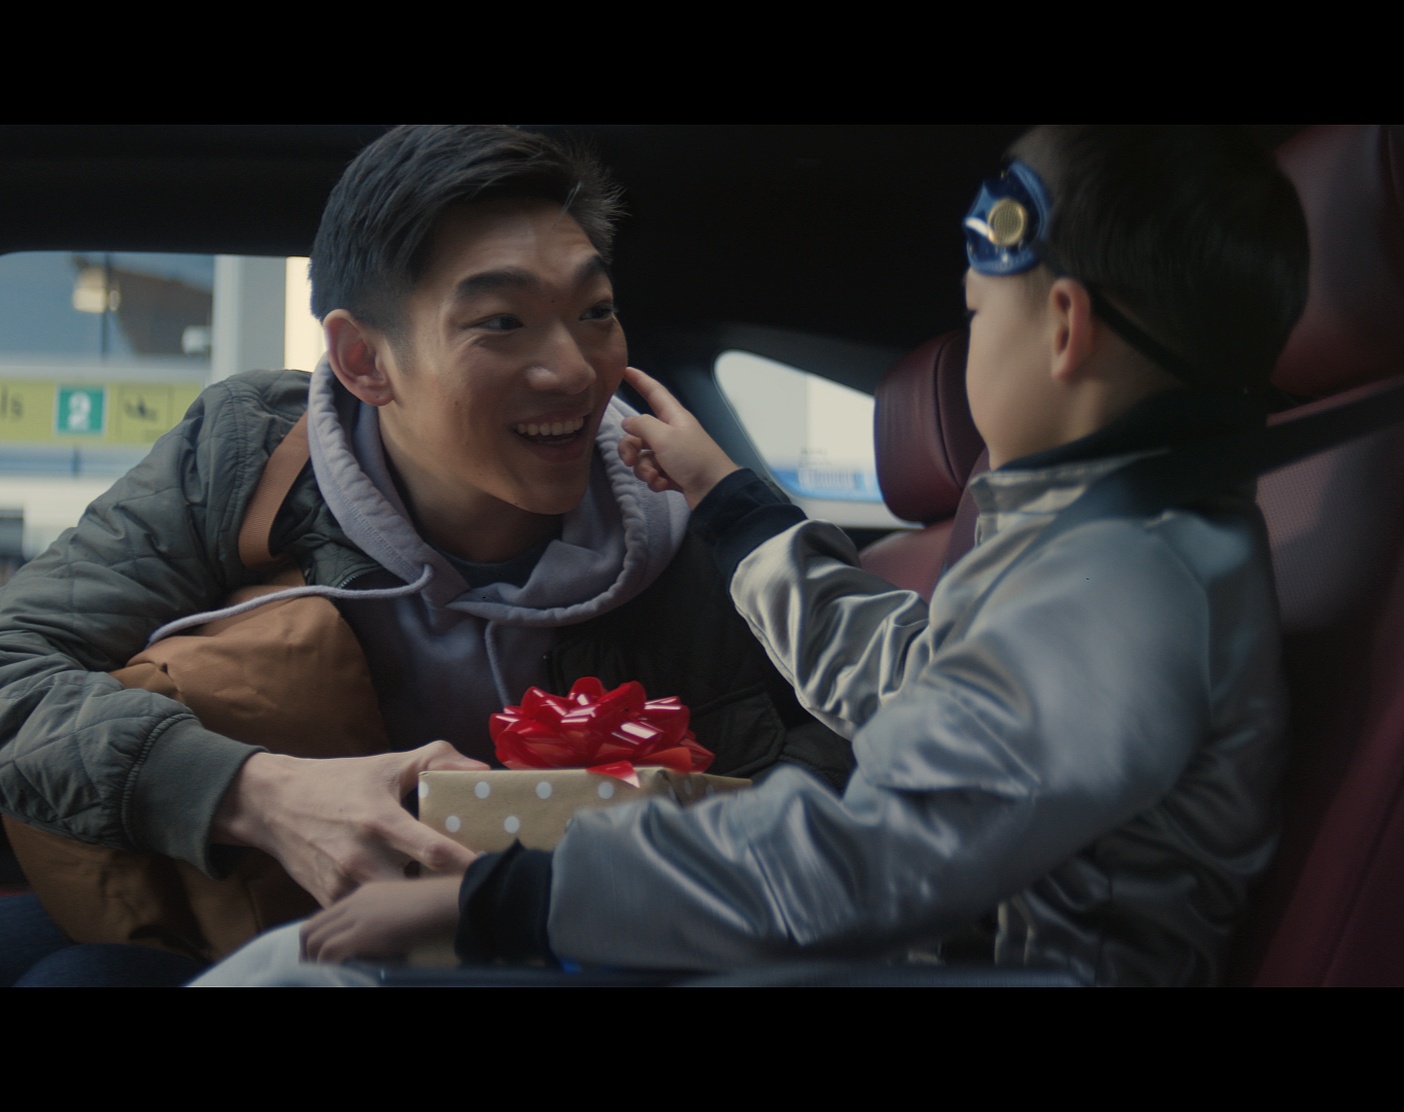 Lexus Launches Annual 'December to Remember' Holiday Campaign